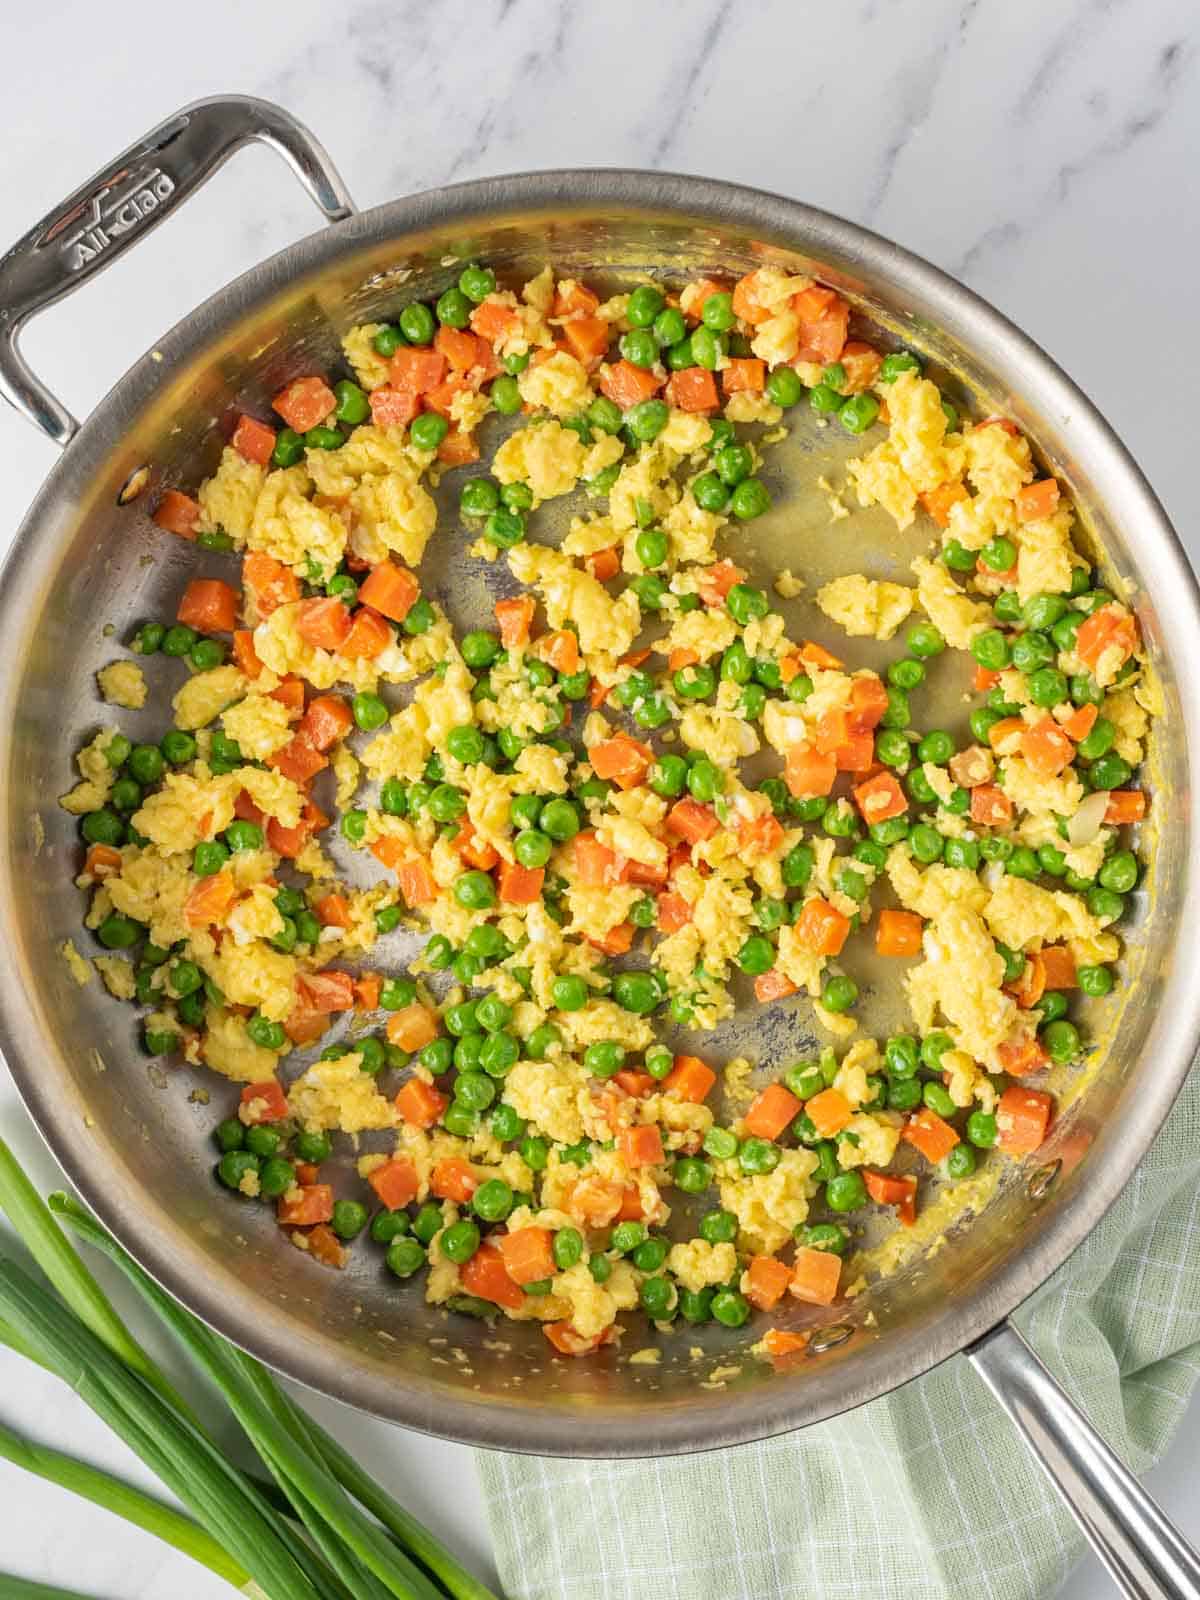 Process of cooking eggs and veggies for Chinese vegetarian fried rice.